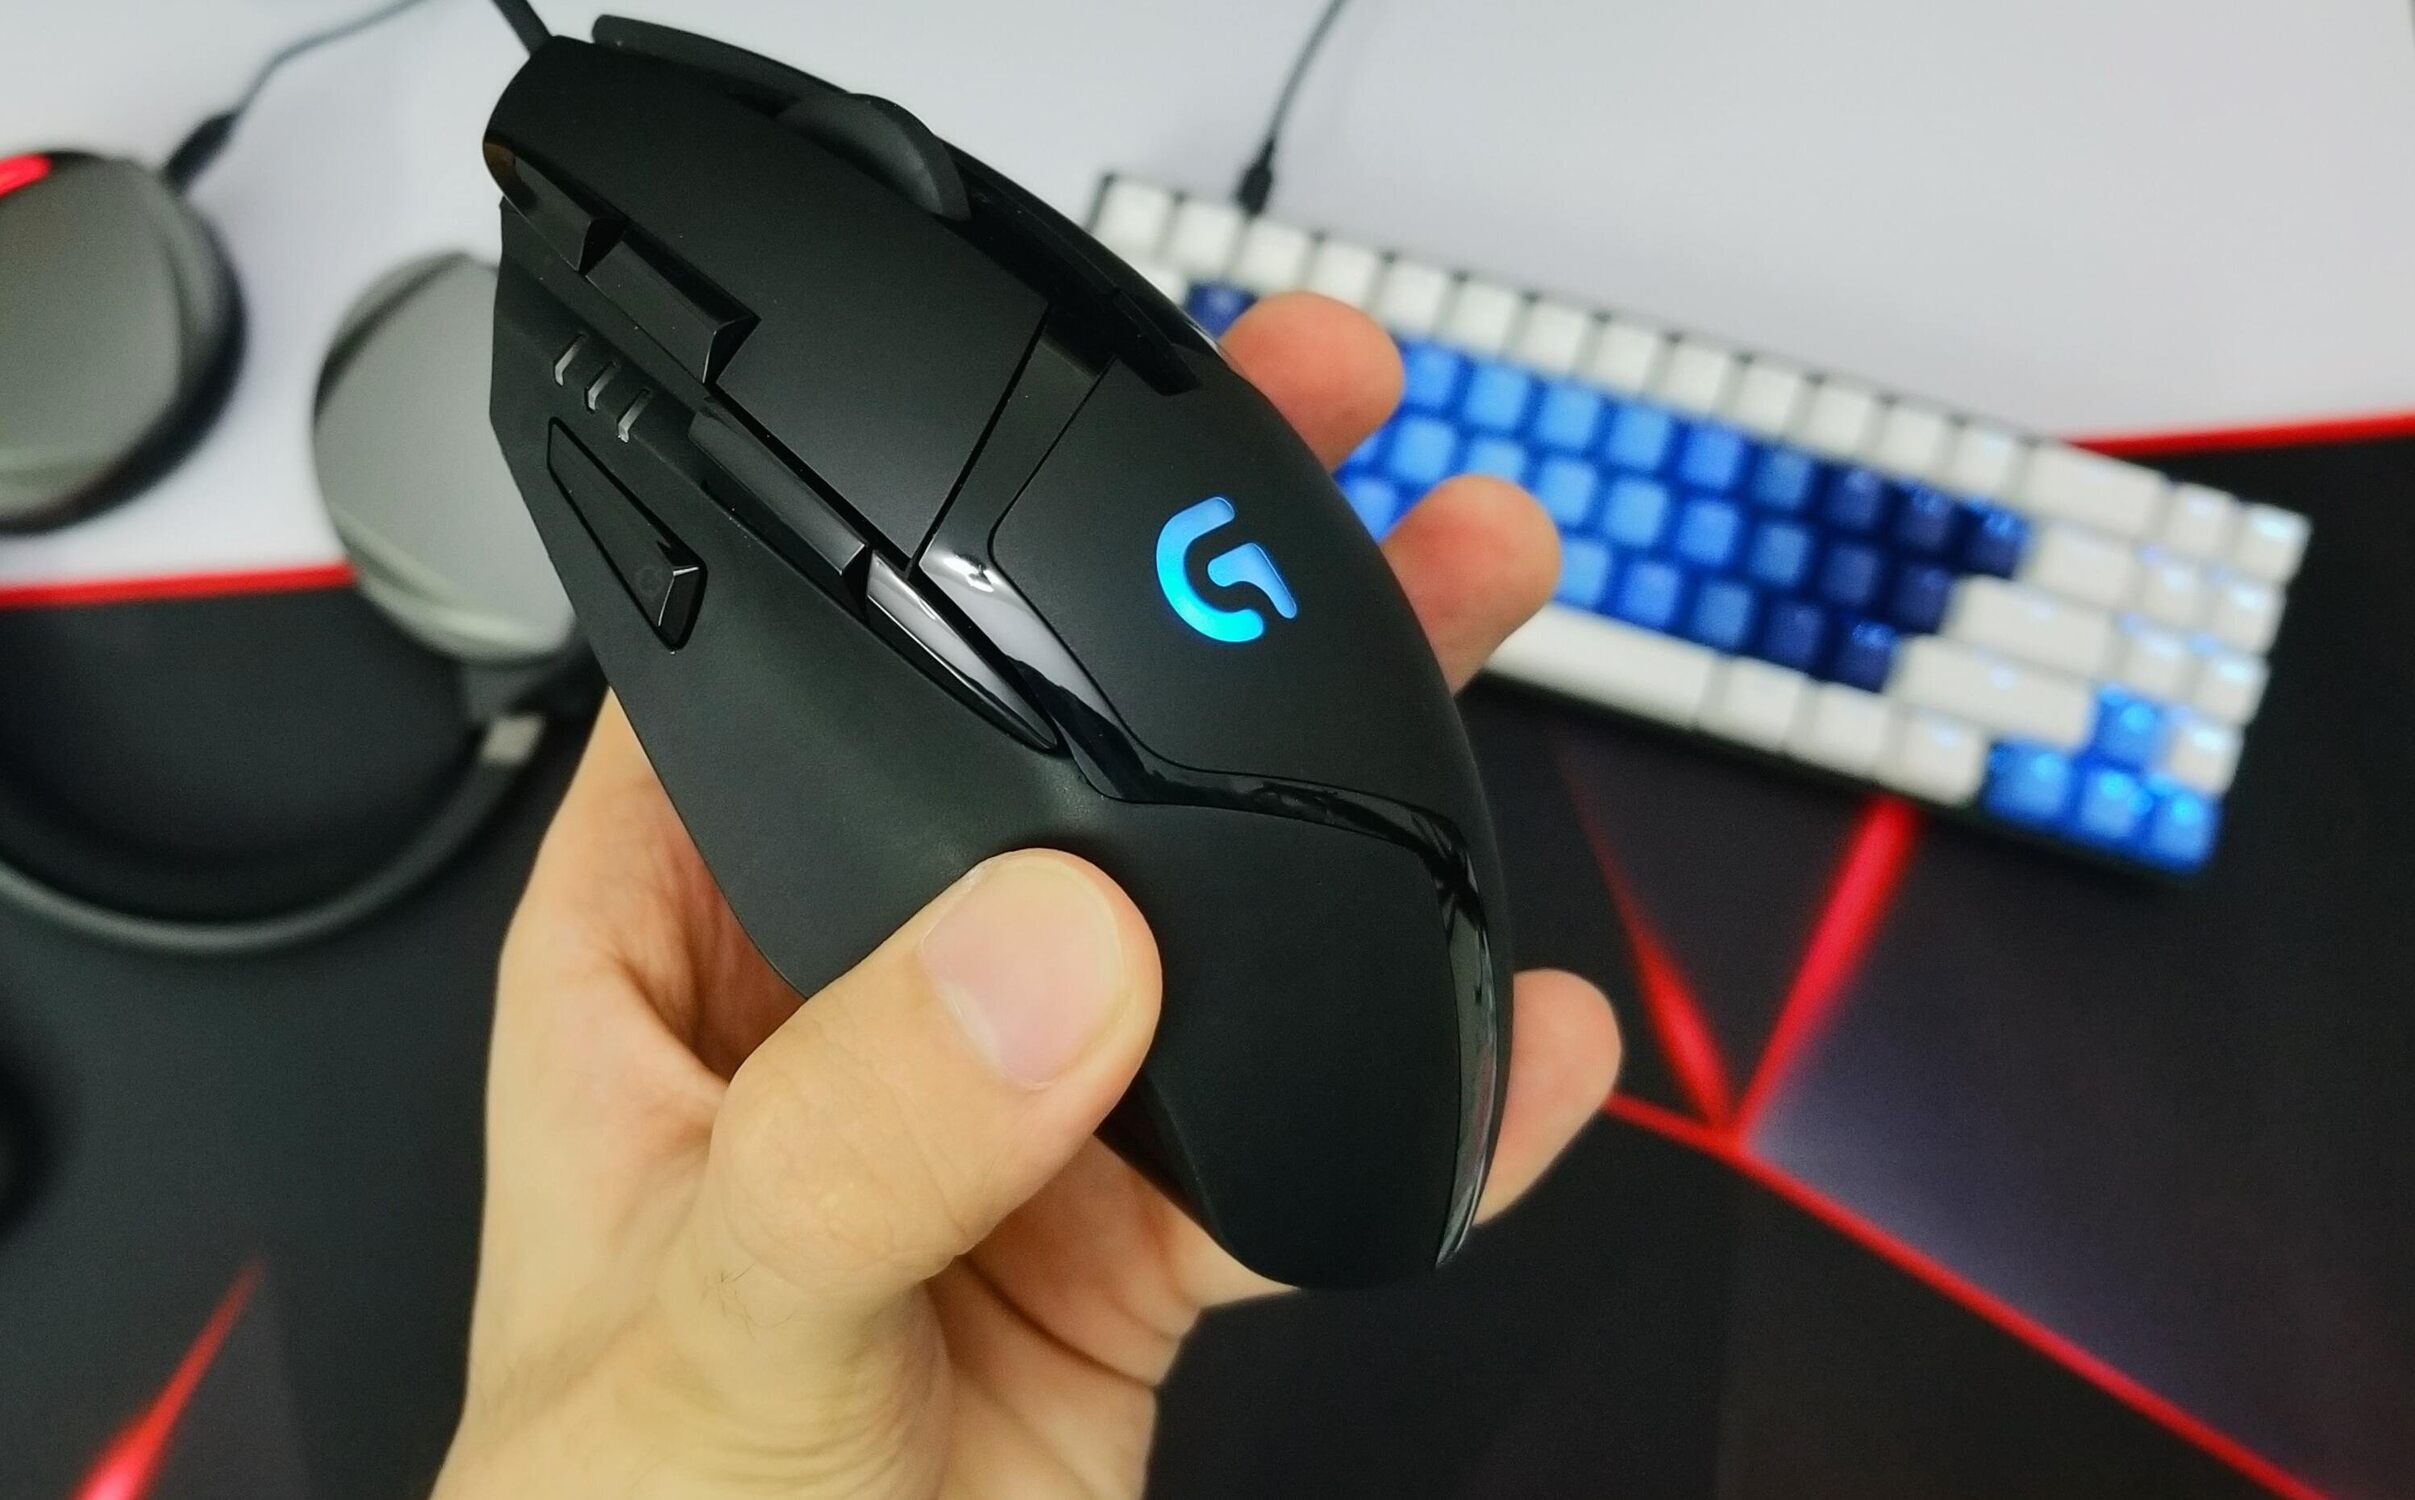 Logitech Gaming Mouse: How To Bind Keys To A Keyboard Key